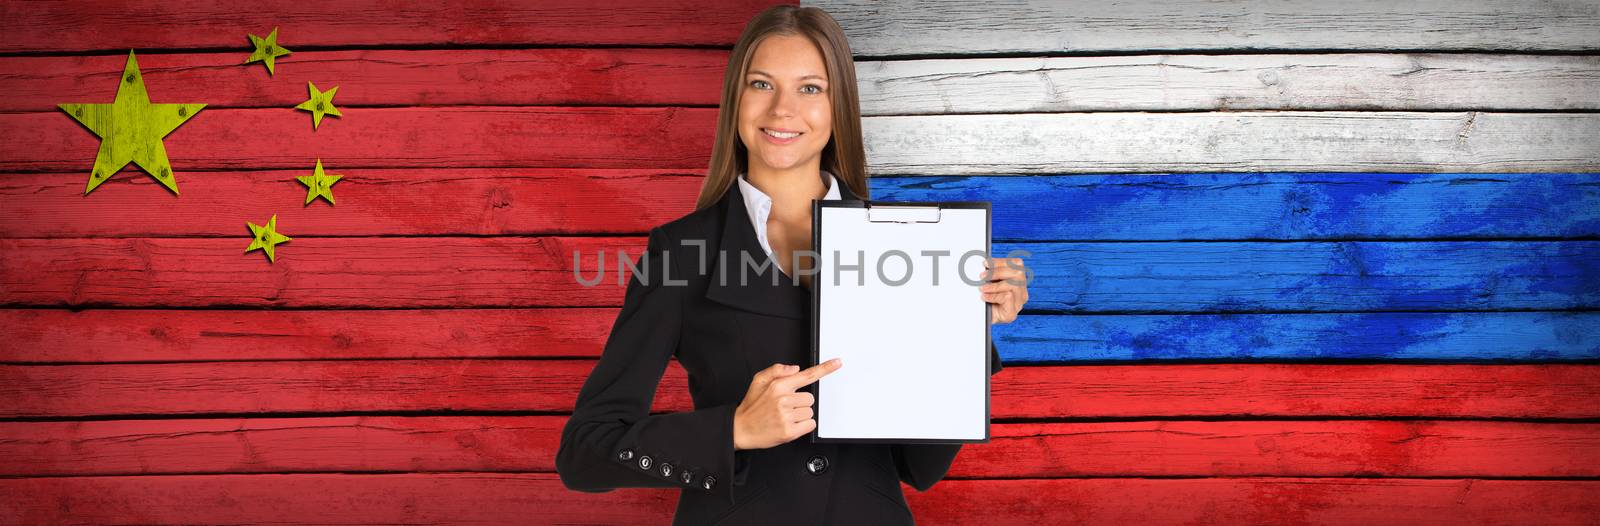 Businesswoman holding paper holder. China and Russian flags as backdrop